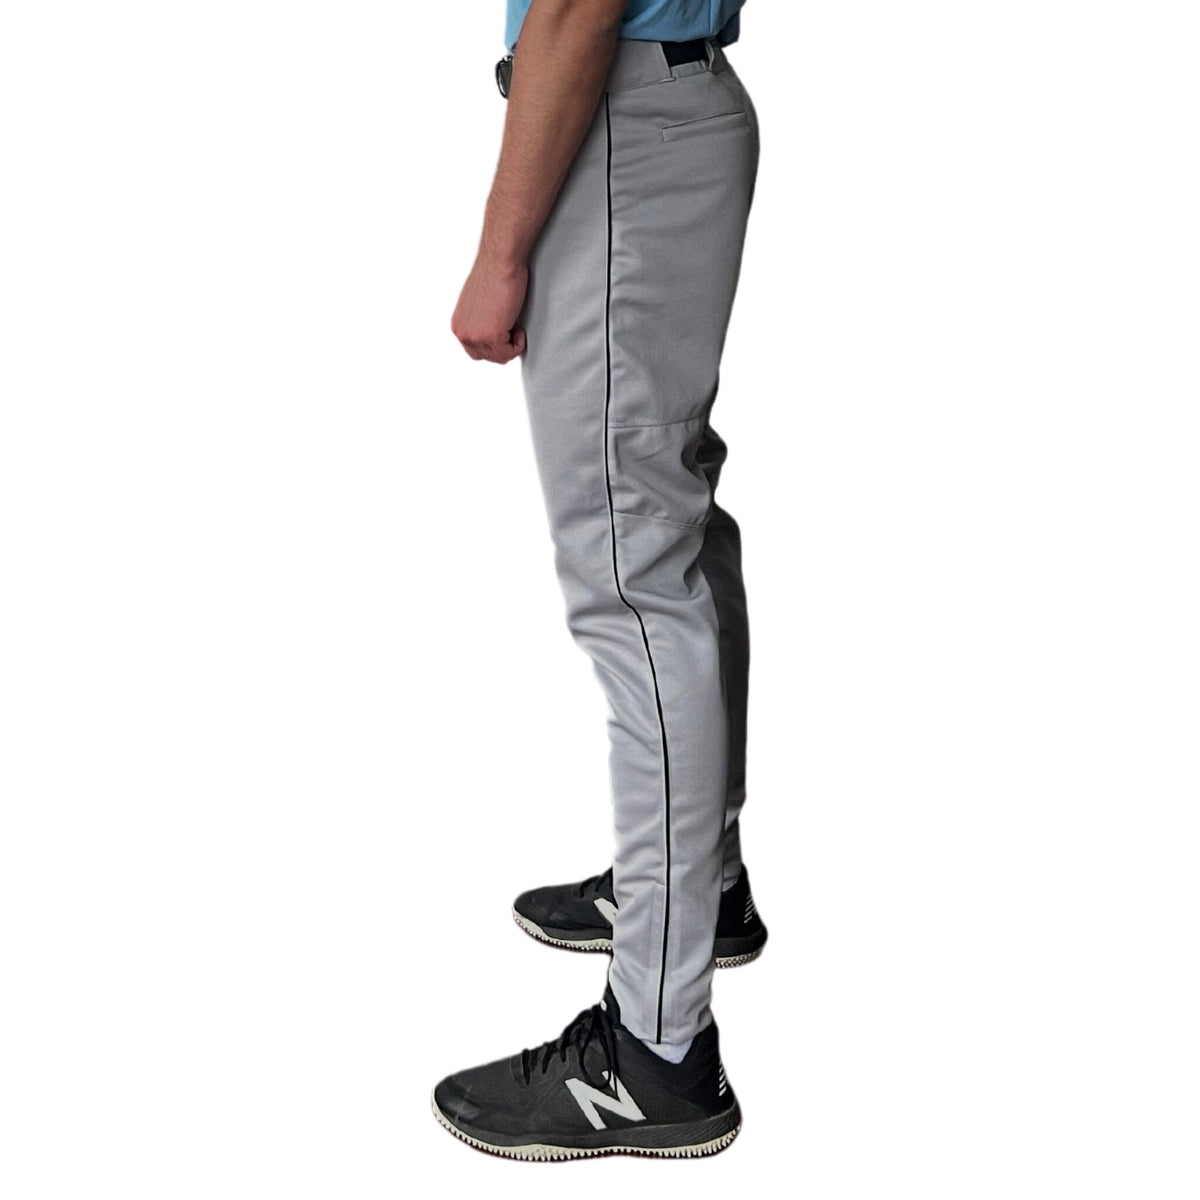 fitted baseball pants